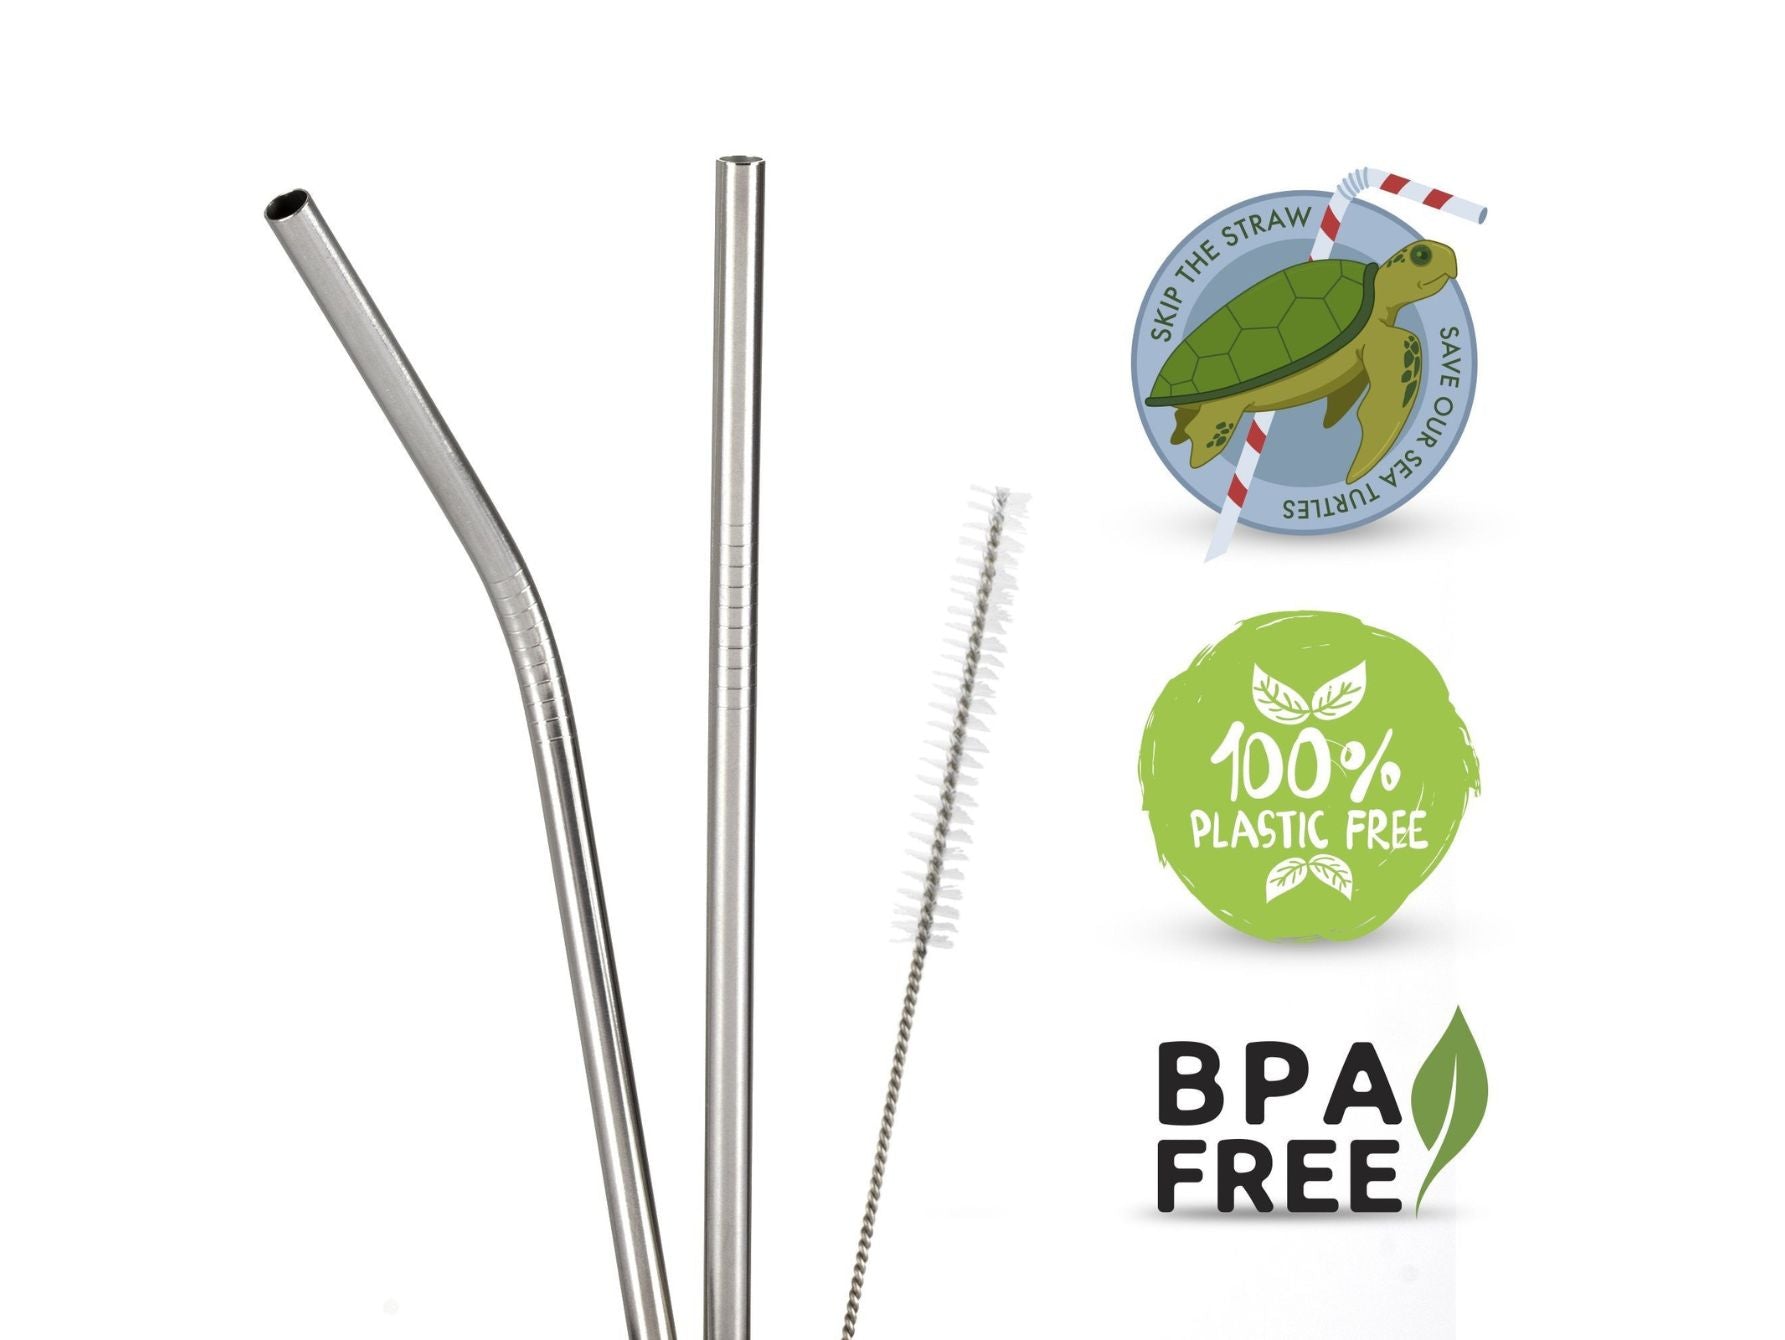 Stainless Steel Straws - Eco-Friendly Reusable Straws - Set of 2 with Cleaning Brush